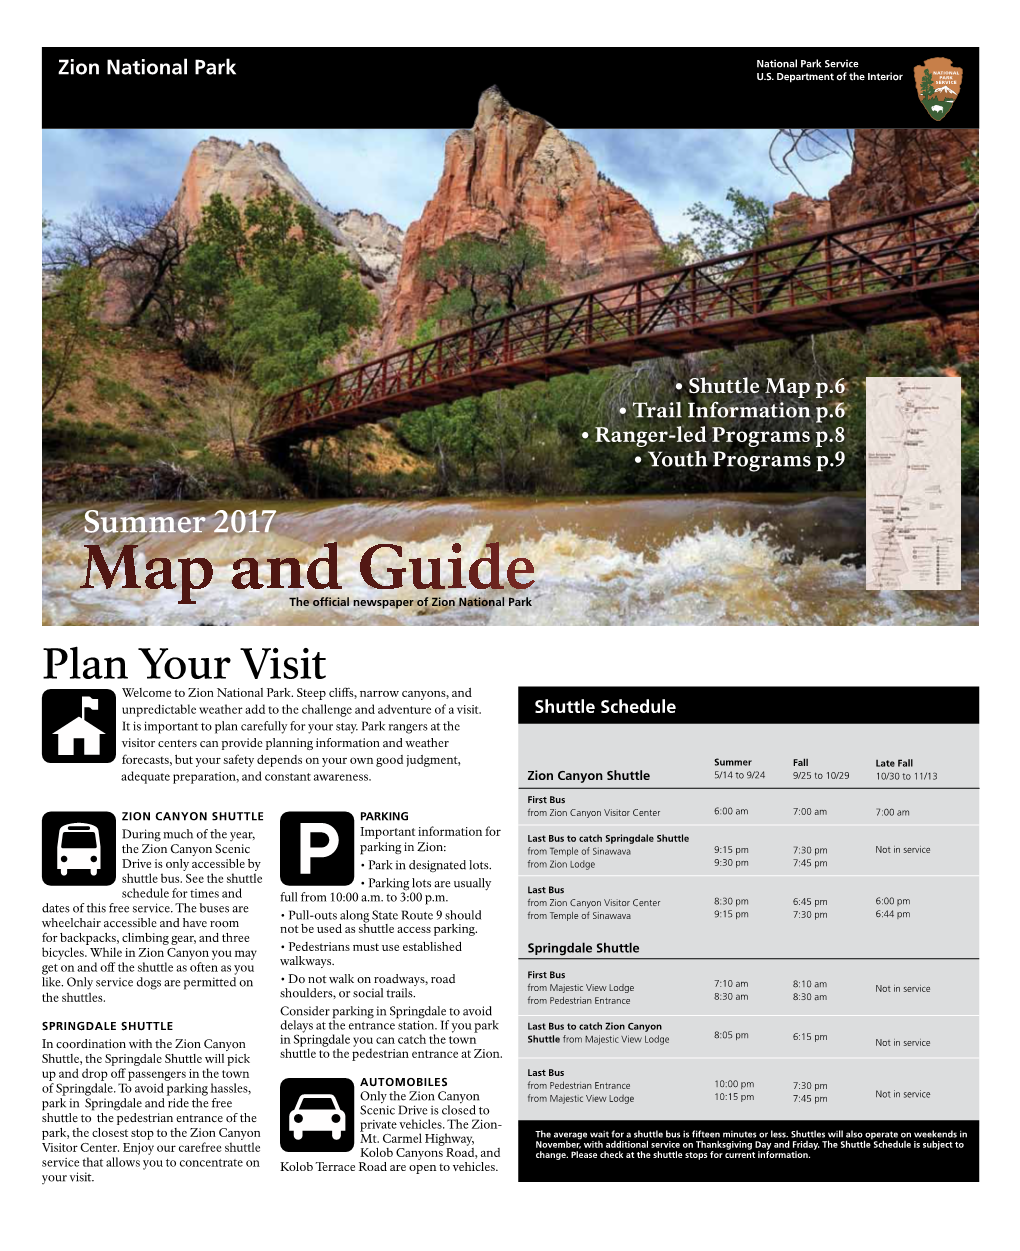 Summer 2017 Map and Guide the Official Newspaper of Zion National Park Plan Your Visit Welcome to Zion National Park